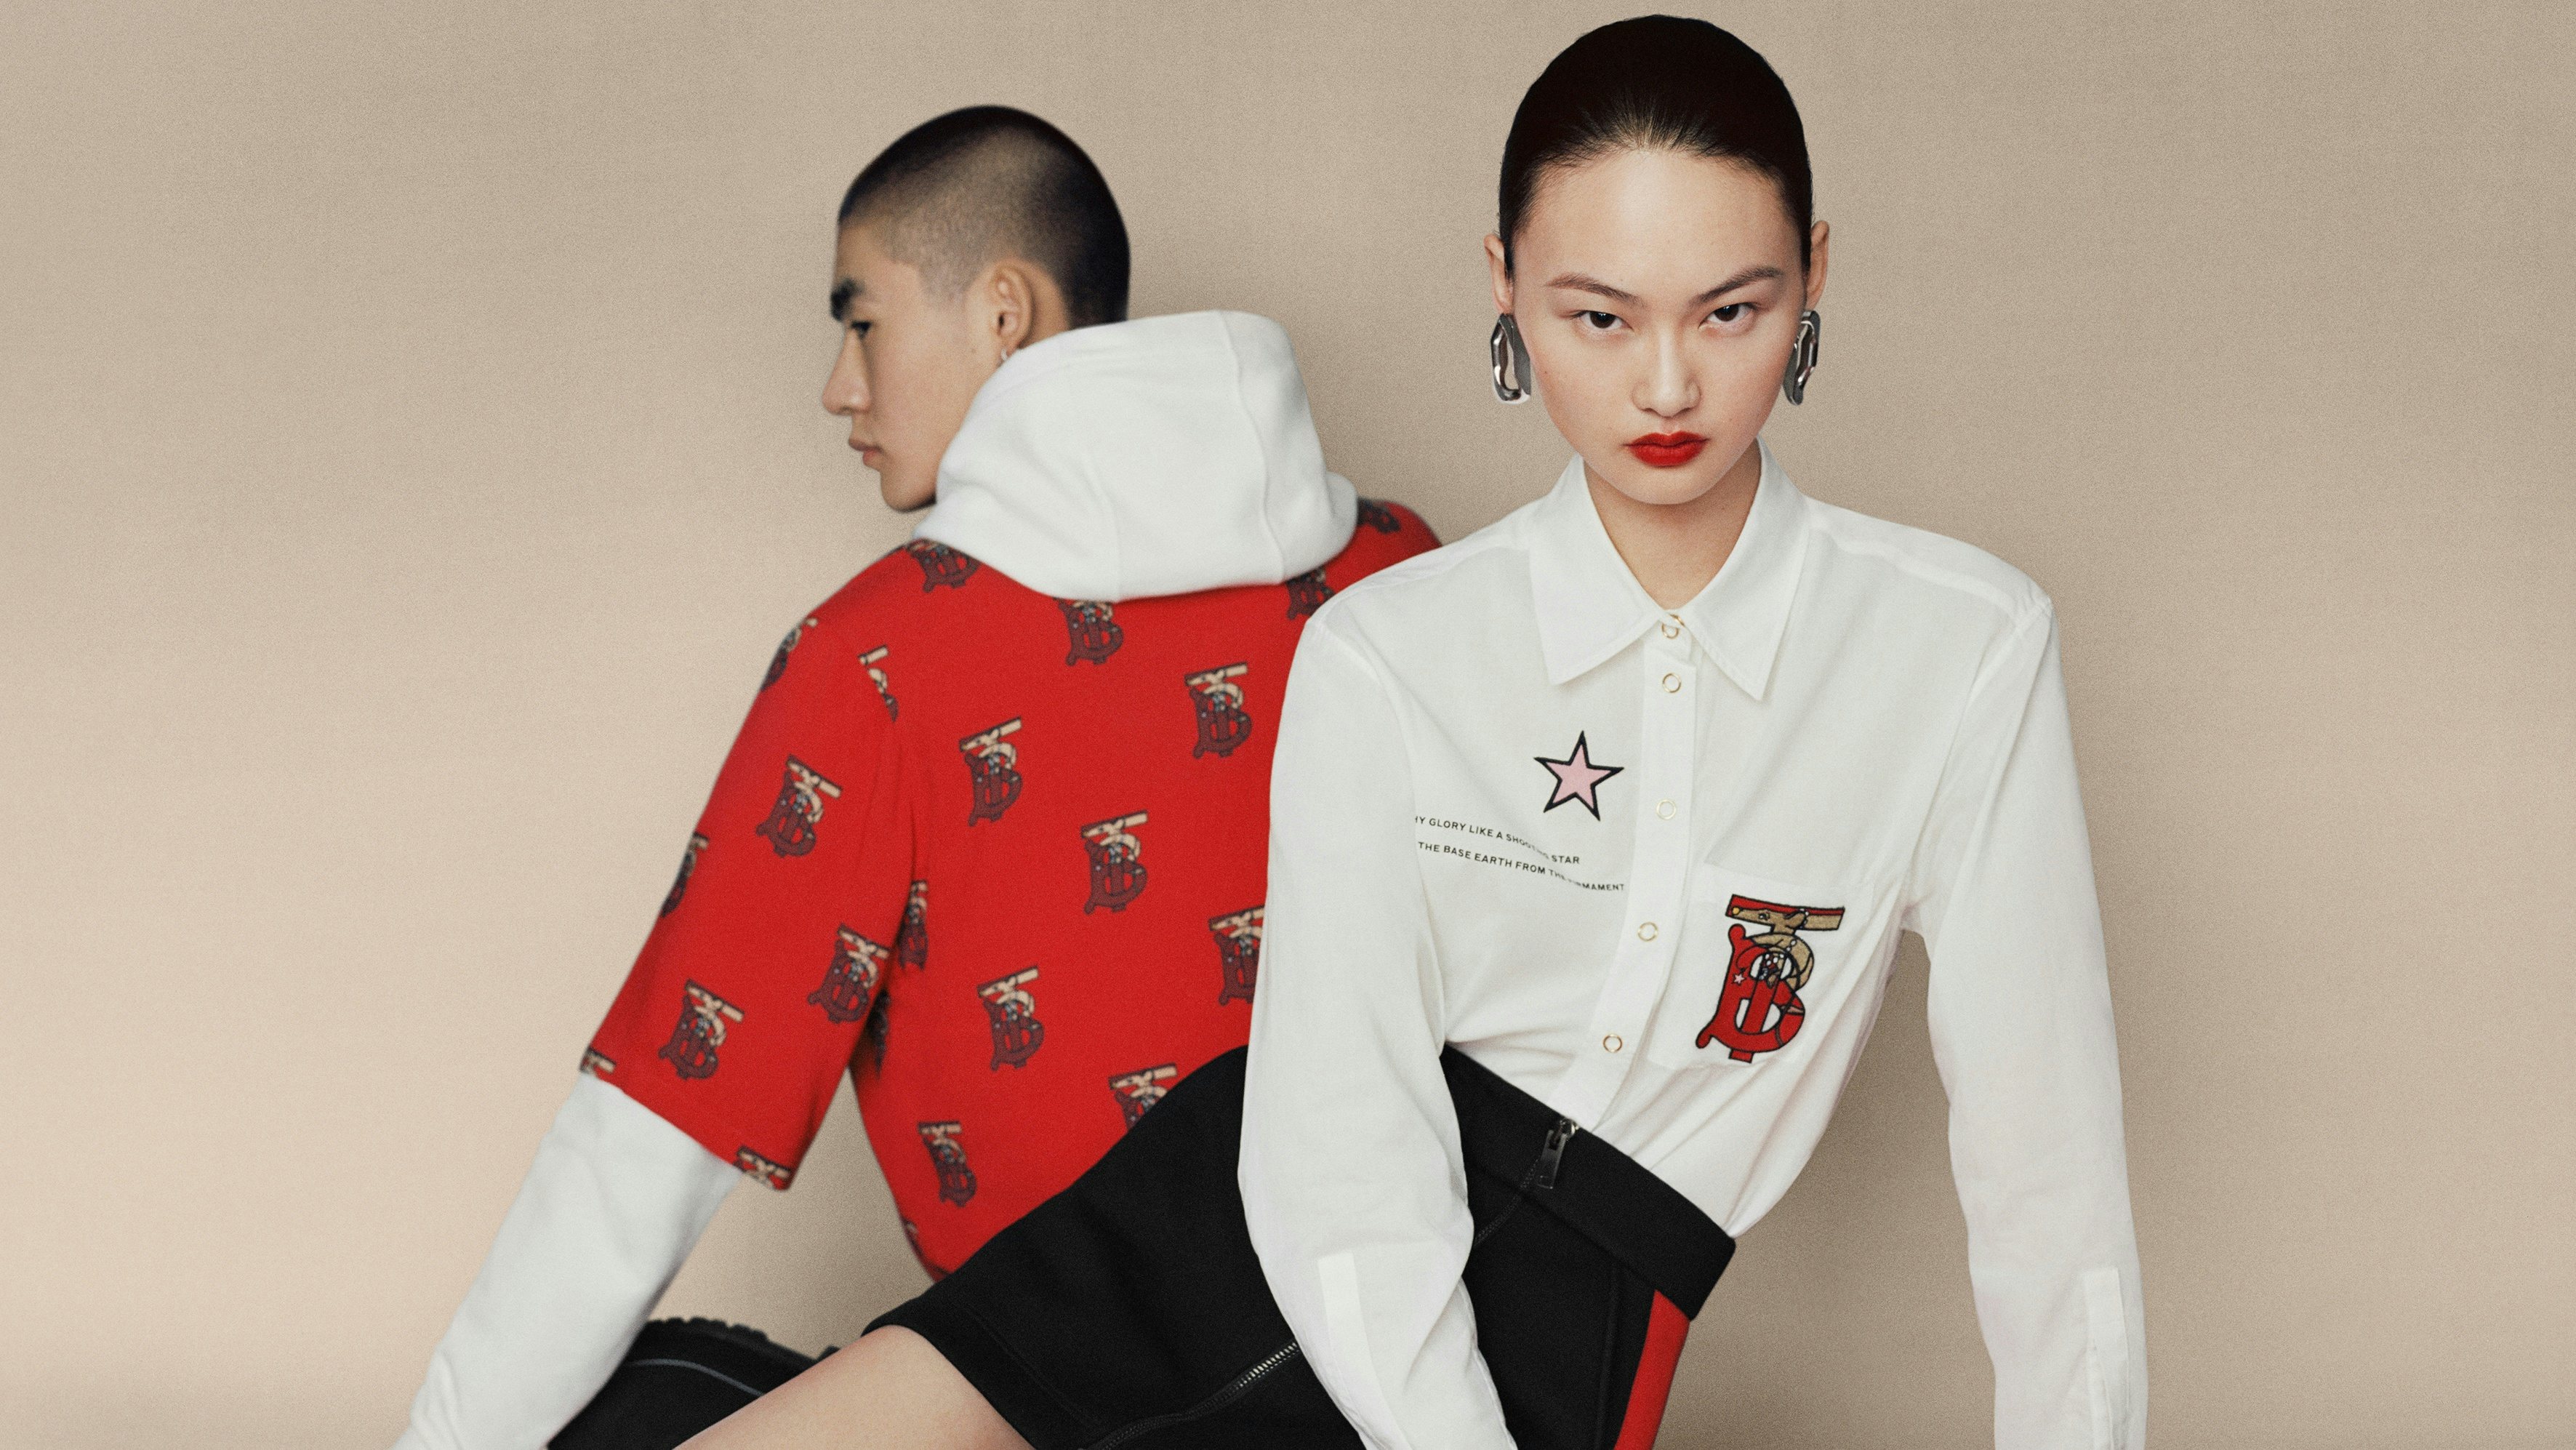 Burberry is taking its Fall 2020 runway show to Shanghai as part of its dedicated program to reach China’s savvy, young consumers. Photo: Burberry.